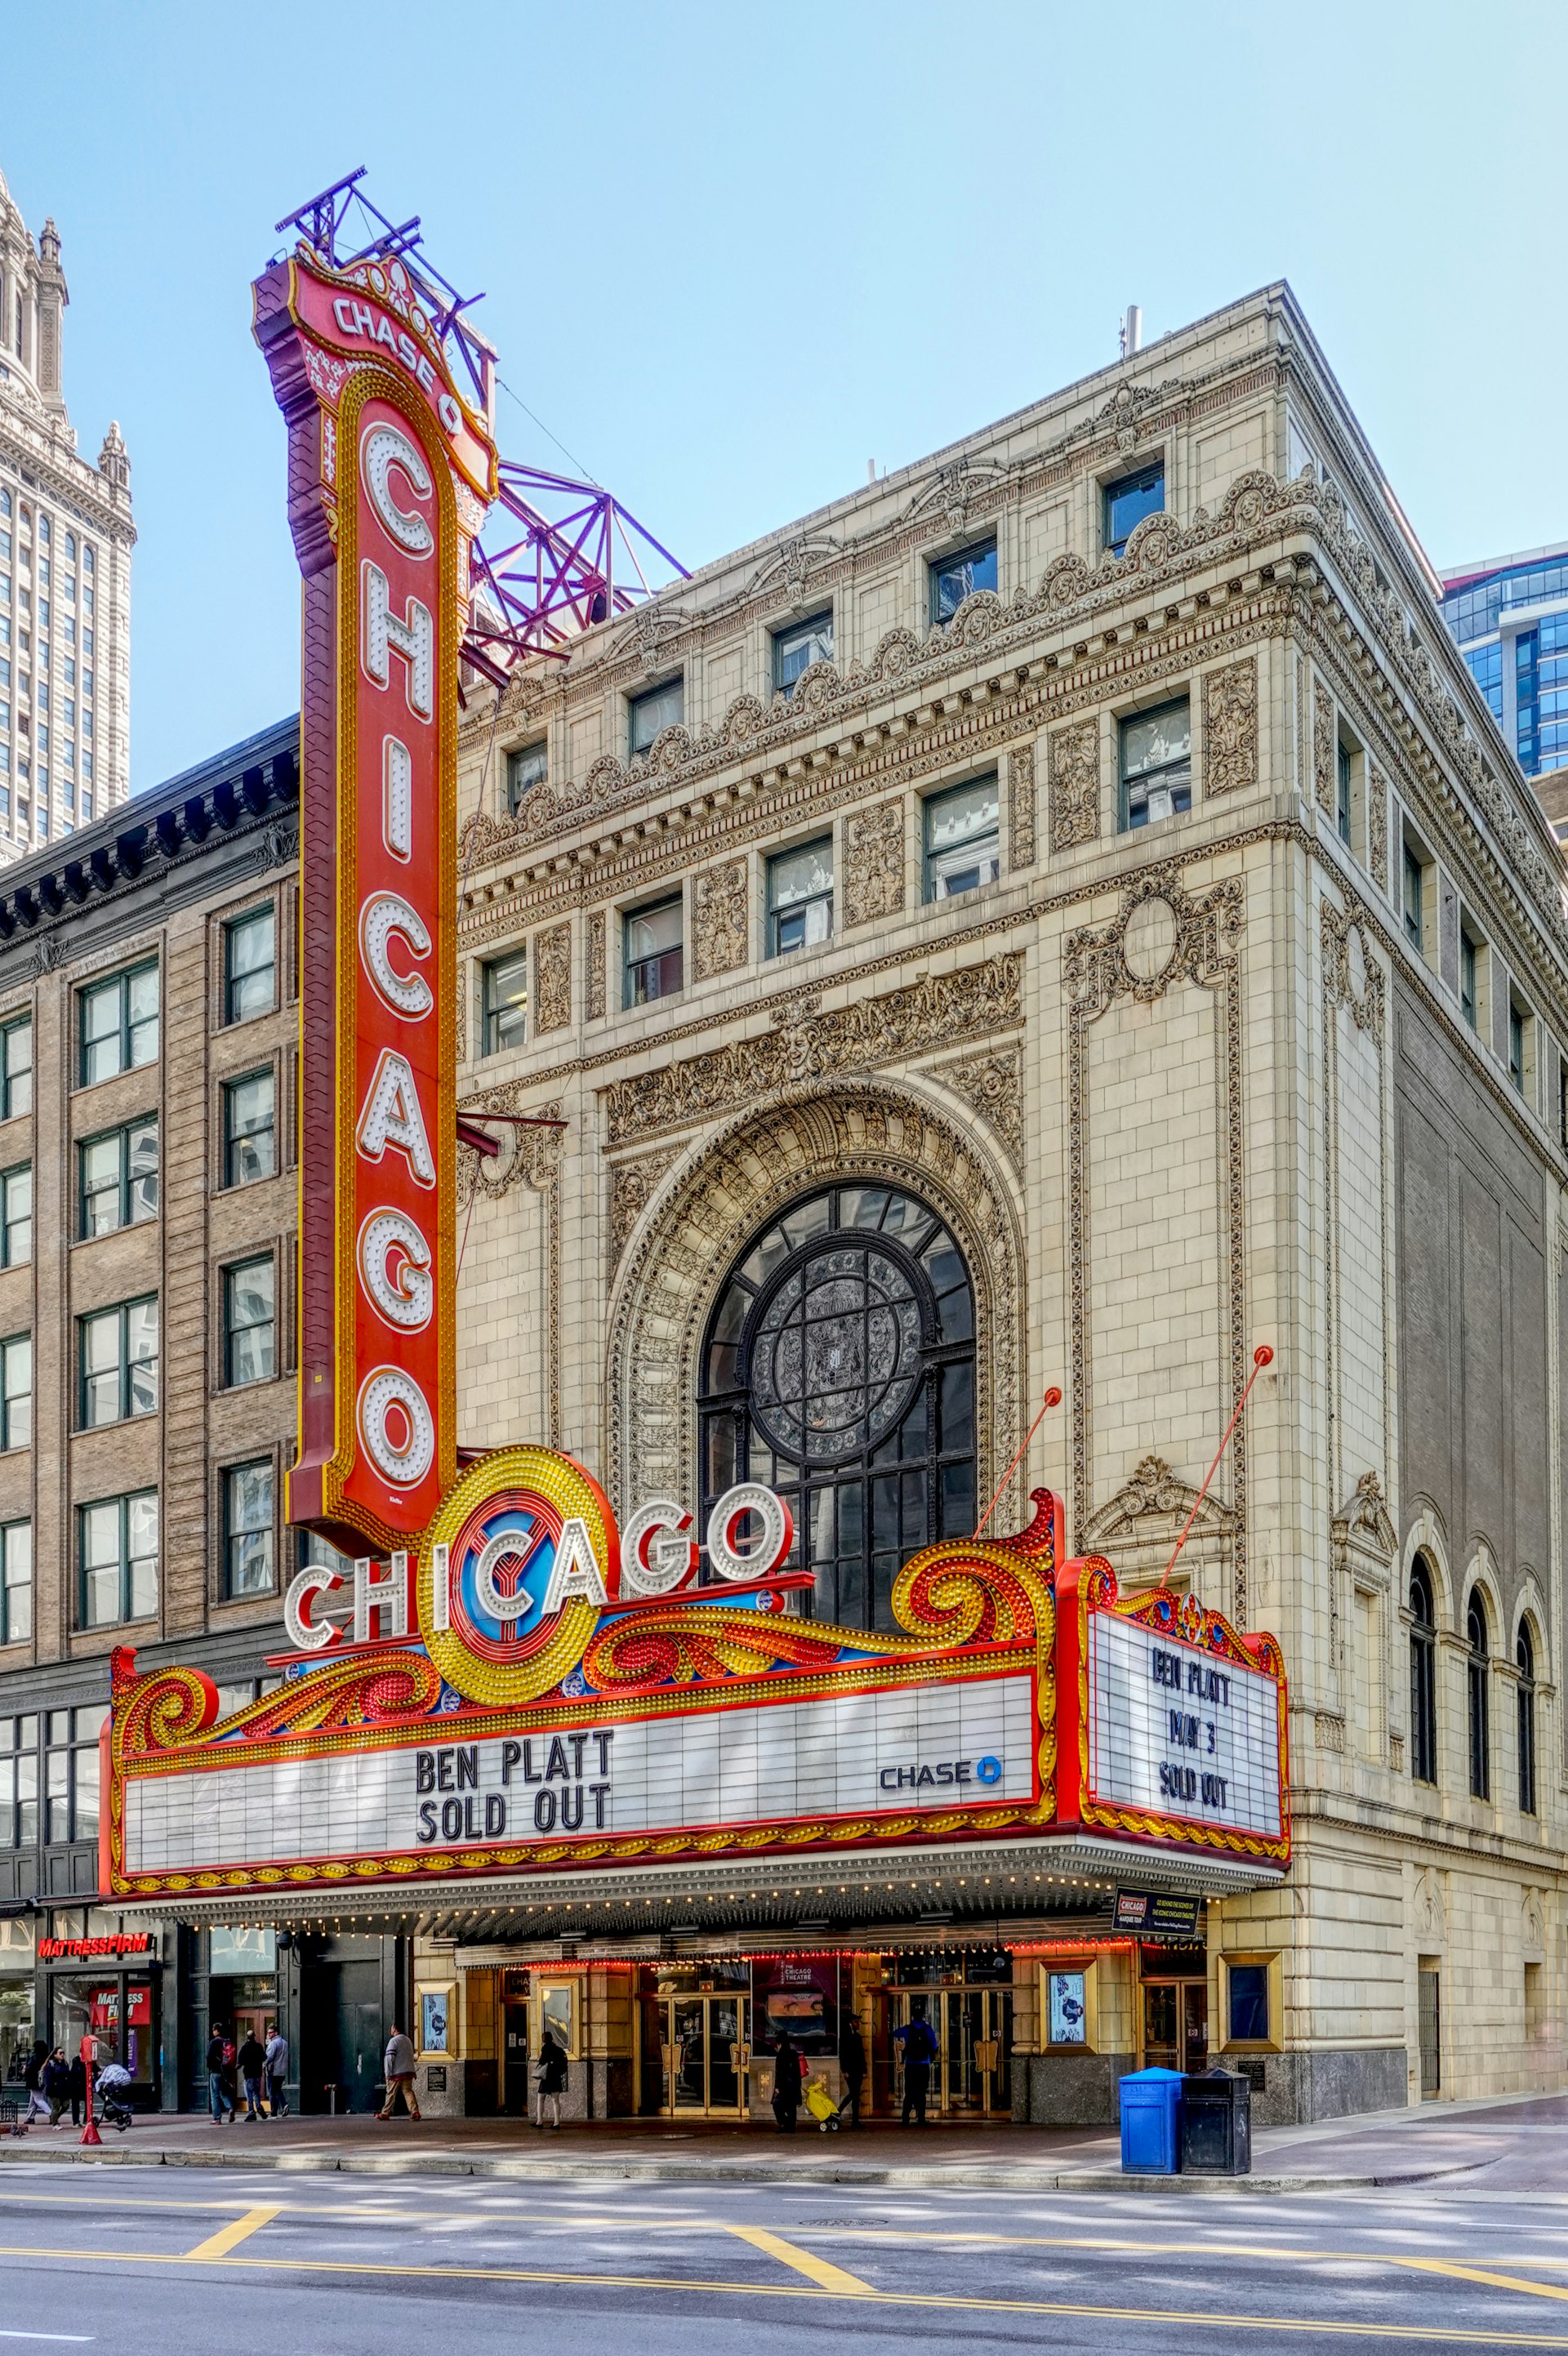 A red-and-white sign saying "Chicago" outside a traditional theater